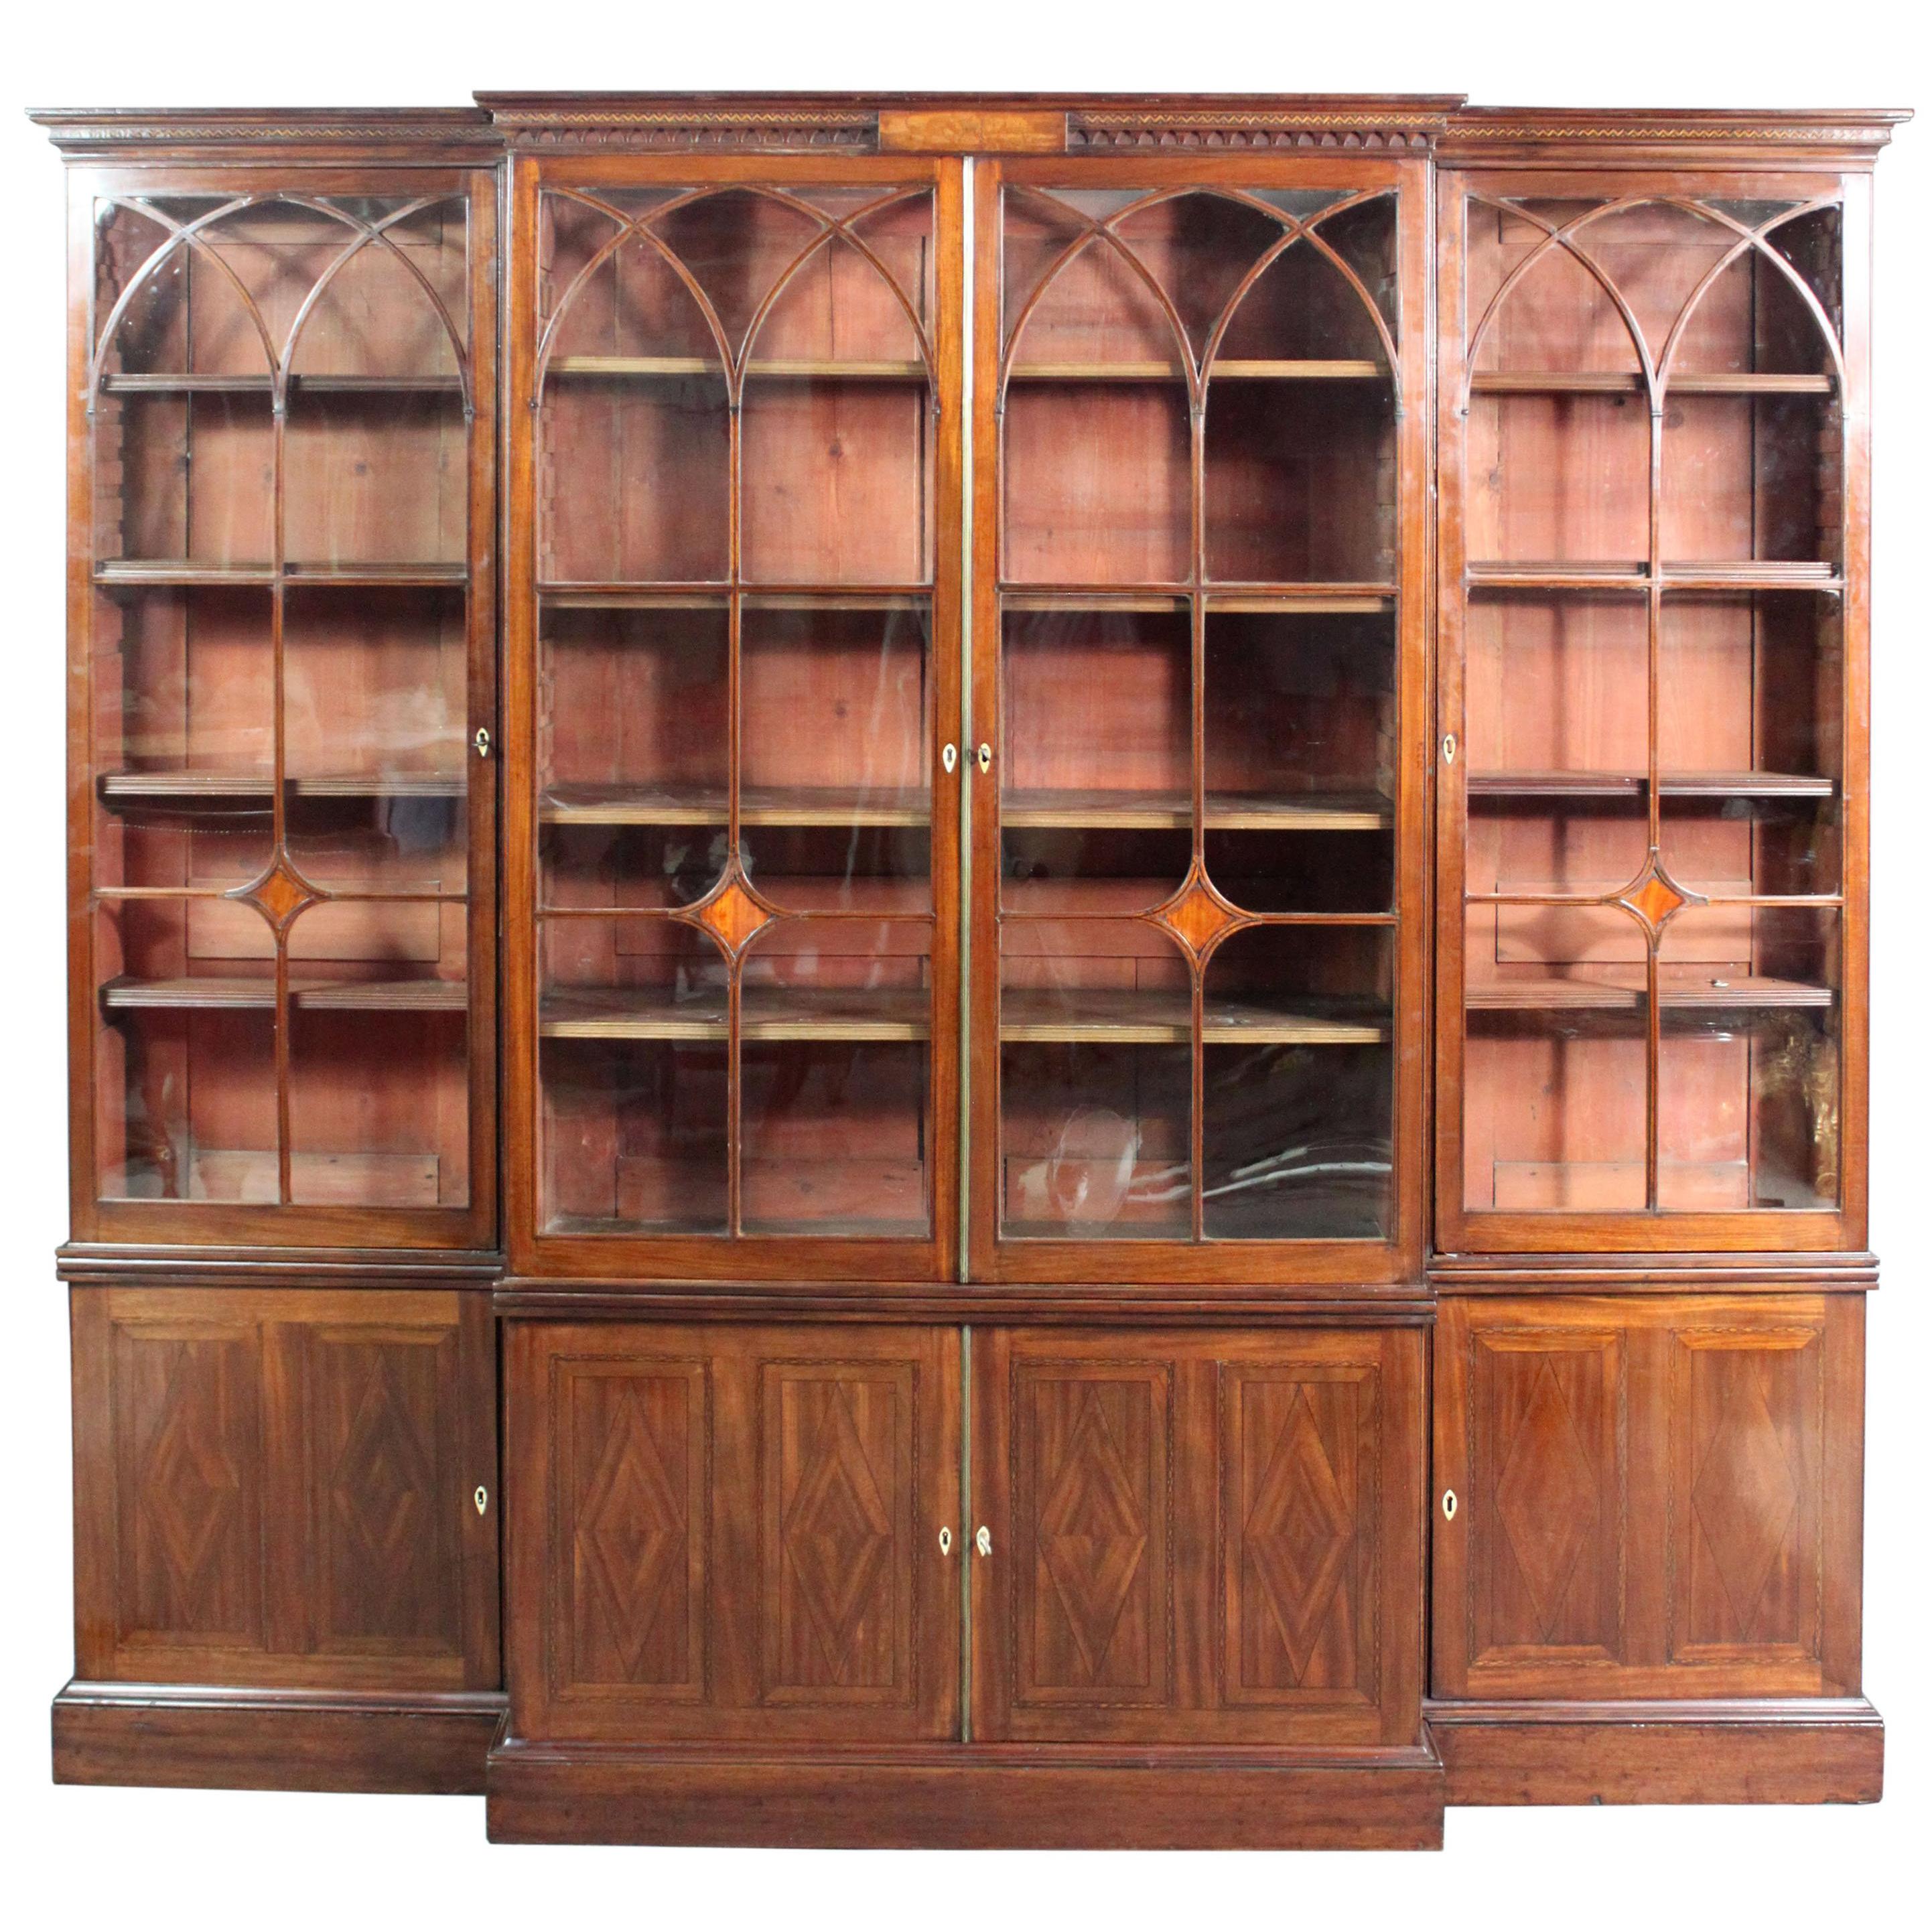 A George III Sheraton period mahogany breakfront bookcase of good low-waisted proportions, attractive arched glazing bars inlaid with ebony and satinwood diamonds which match the inlaid diamonds in the doors of the base, dismantles into 3 vertical